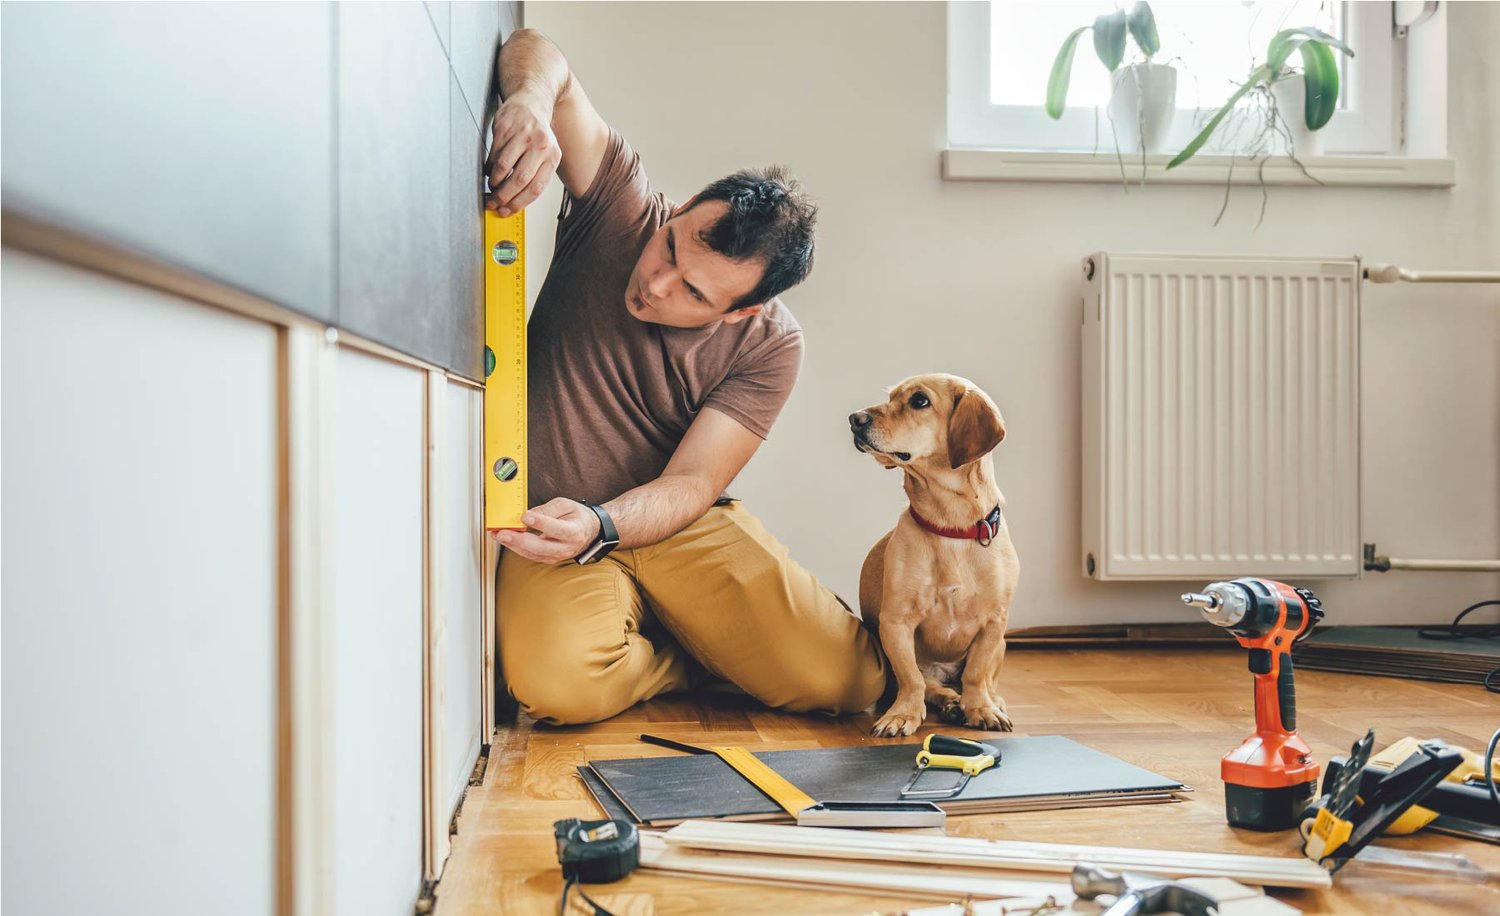 Why Pay When You Can DO IT YOURSELF? Top 10 Impactful DIY Home Projects -  My City Magazine